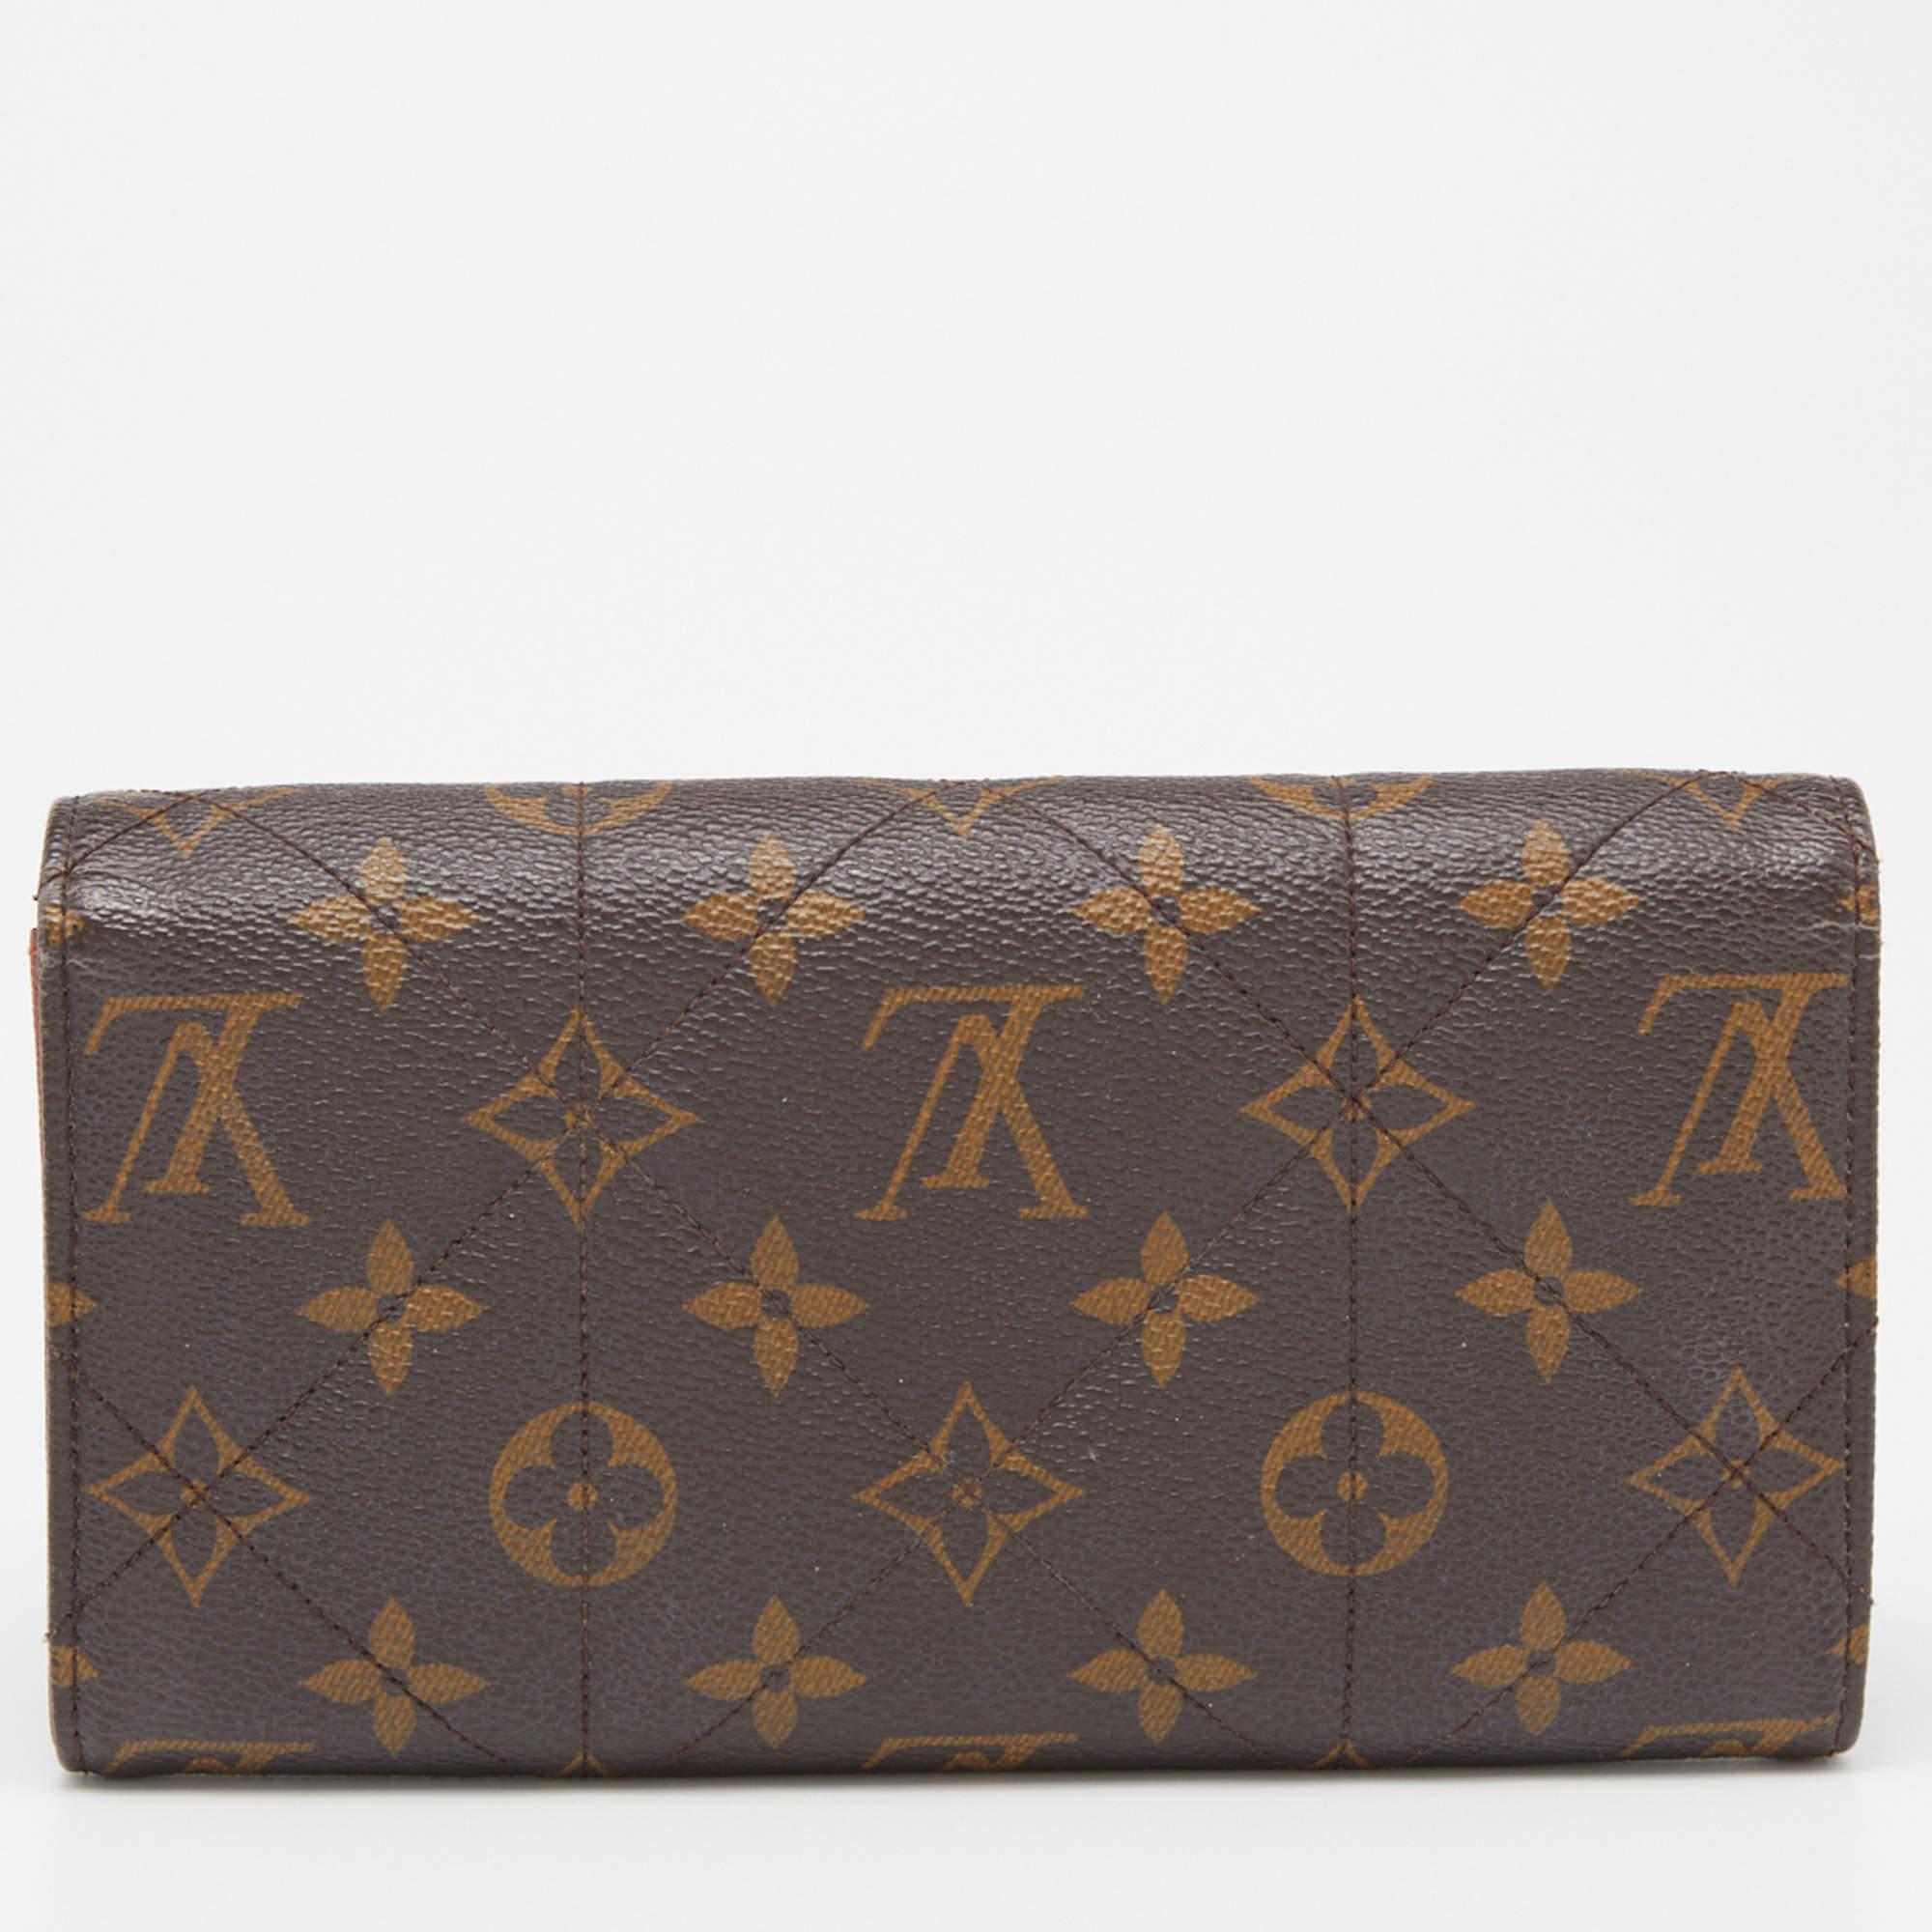 A beautiful wallet for stylish women, this LV wallet is perfect to be carried solo or inside your tote while you step out to run errands. It is a durable accessory.

Includes: Original Dustbag

